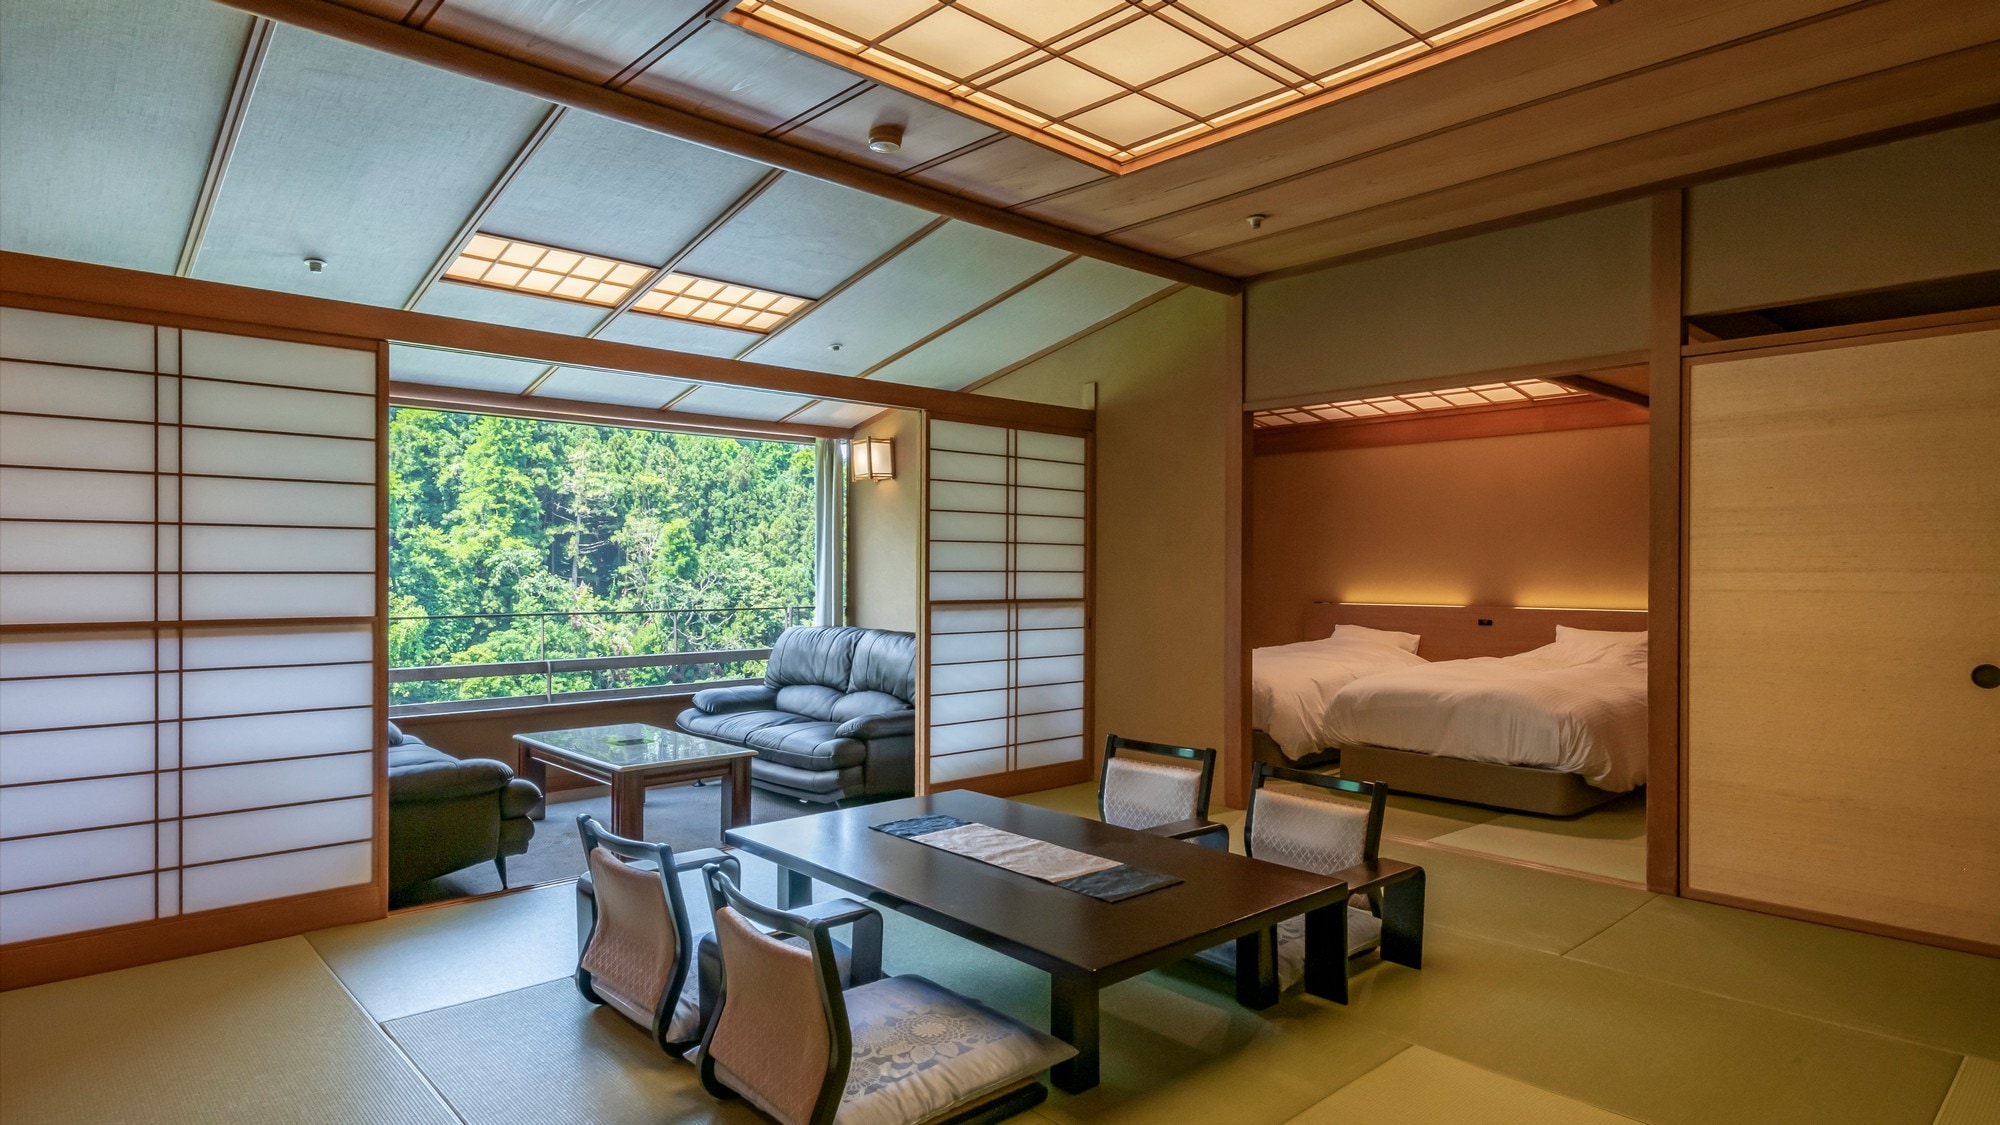 Renewal in January 2019. A Japanese-Western style room with twin beds in one of the two-room rooms